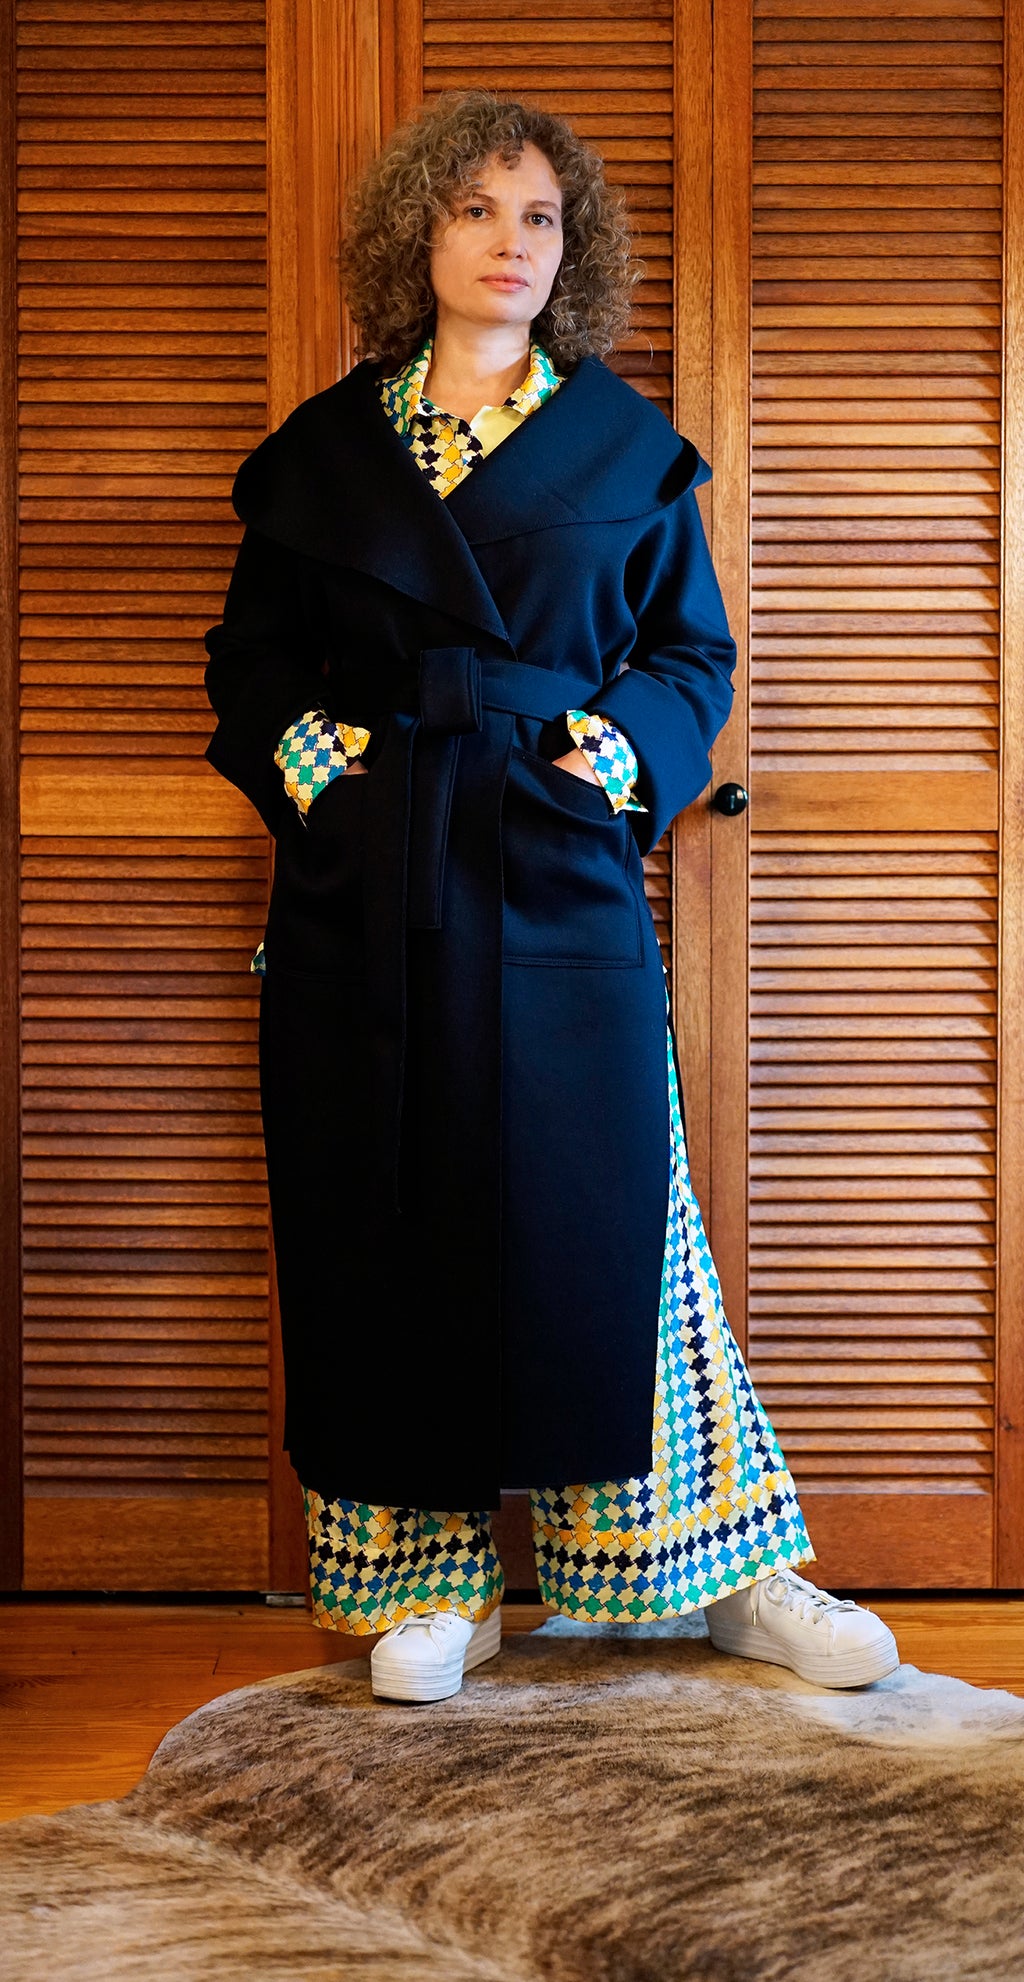 A MELODY COAT IN NIGHT